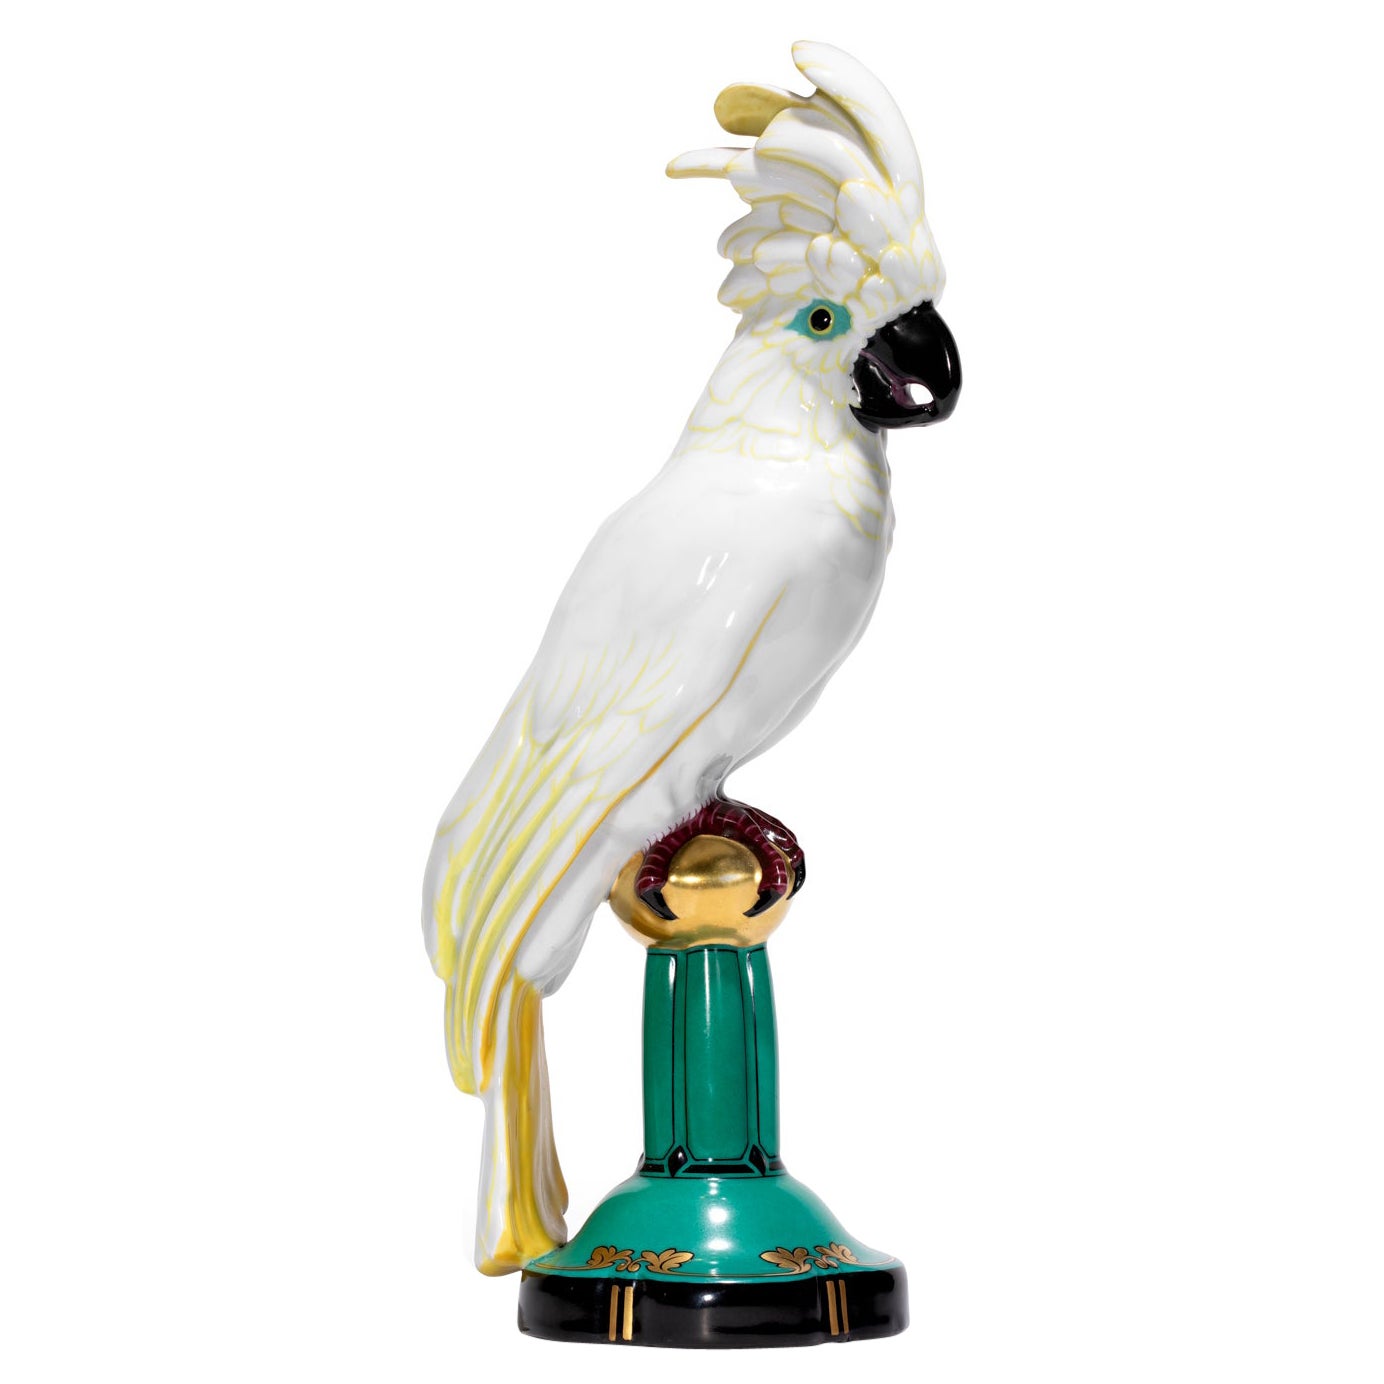 Hutschenreuther-Selb Porcelain Figurine "COCKATOO" Marked #3 on Base For Sale